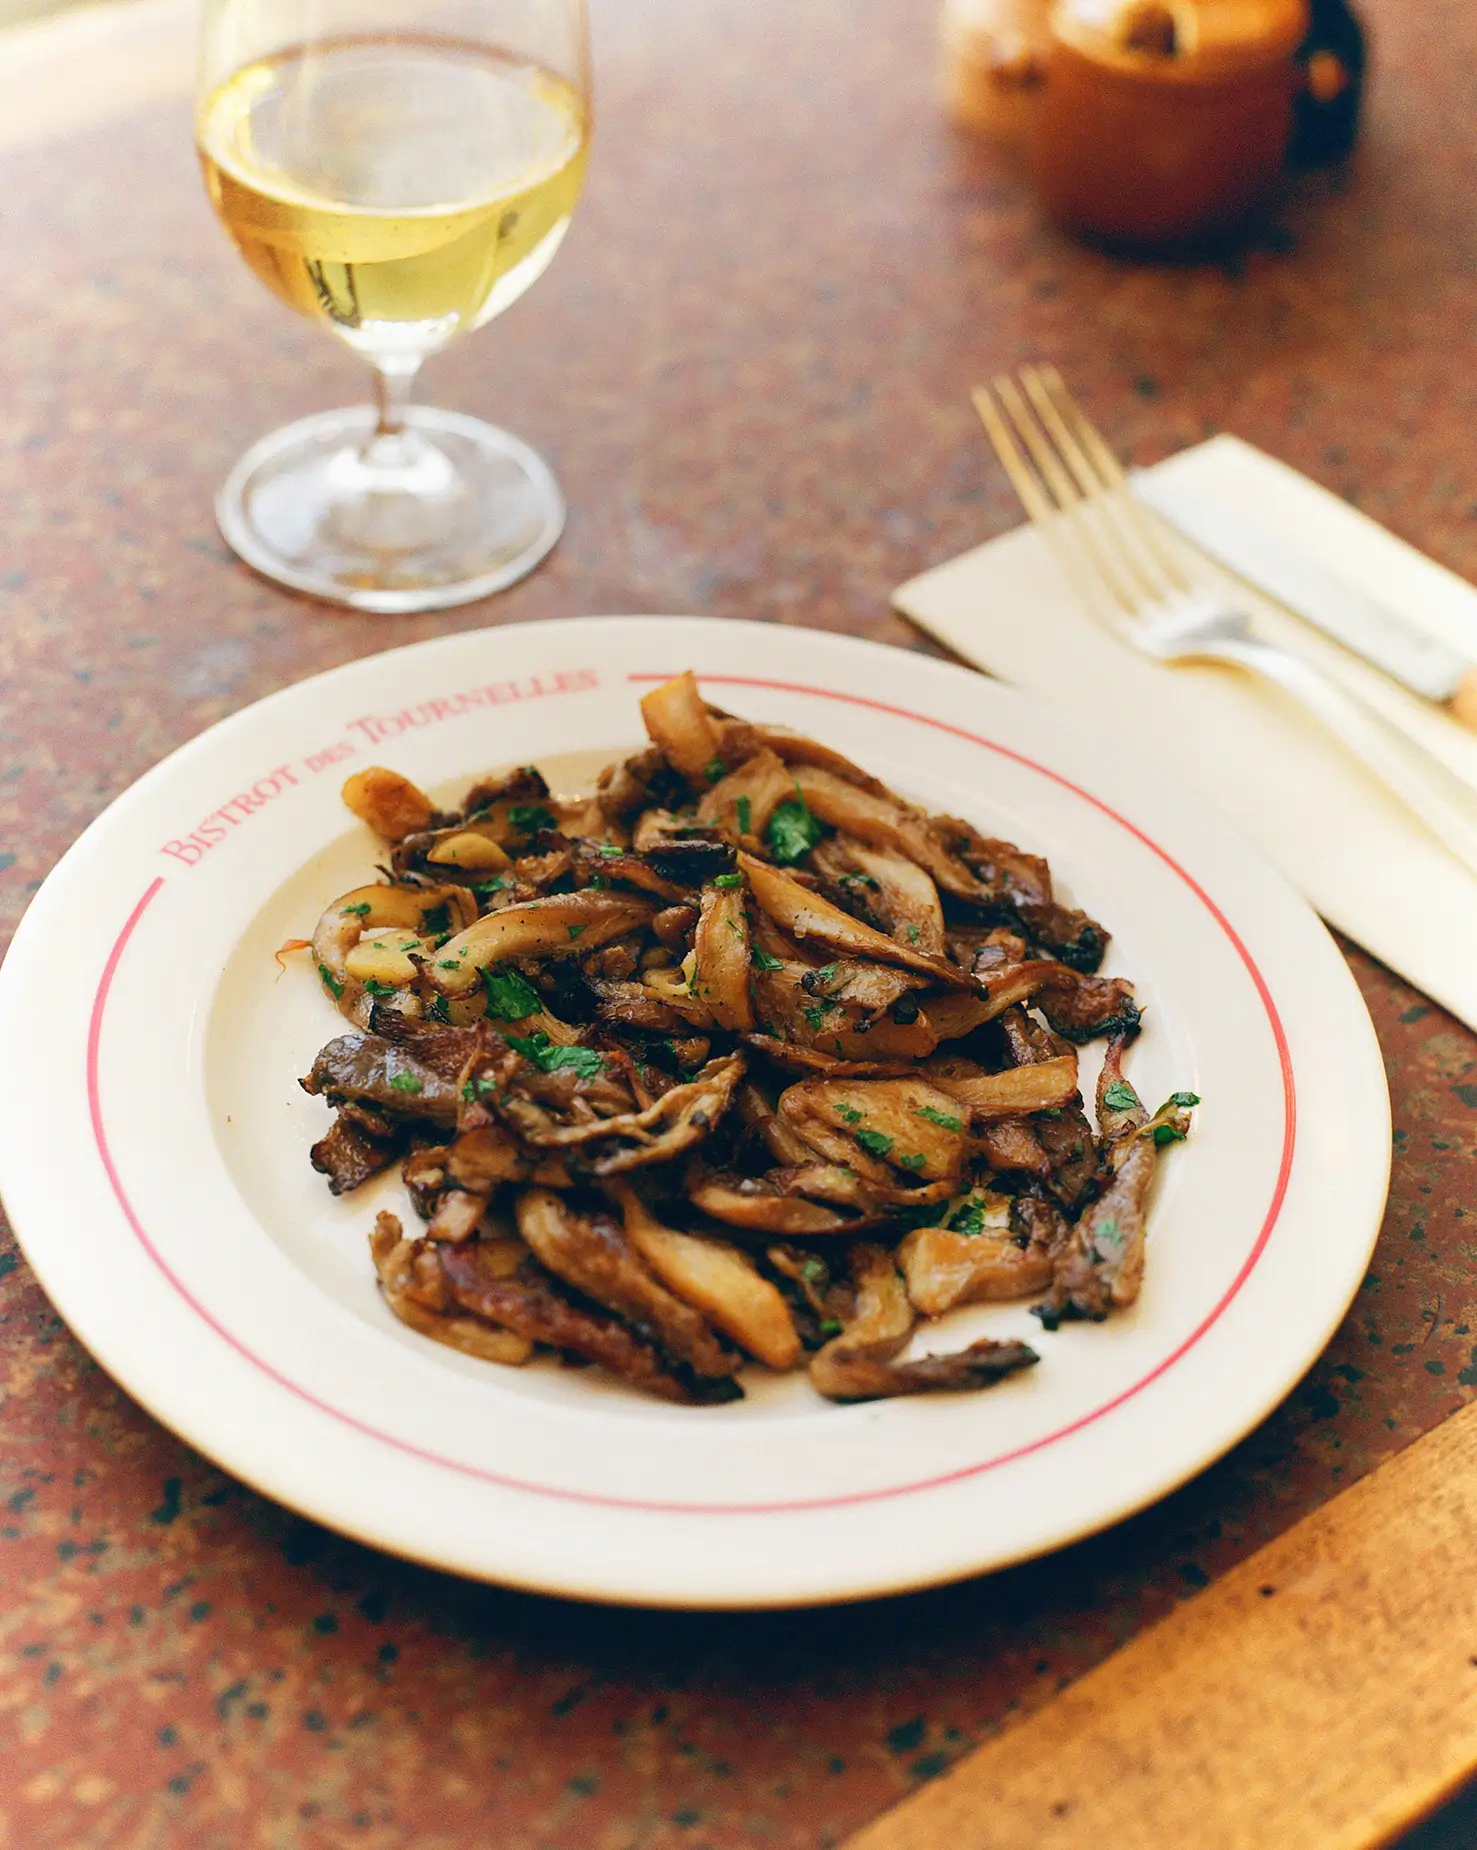 A plate of sautéed mushrooms served at Bistrot Des Tournelles in Paris, with a glass of white wine on a terrazzo table.